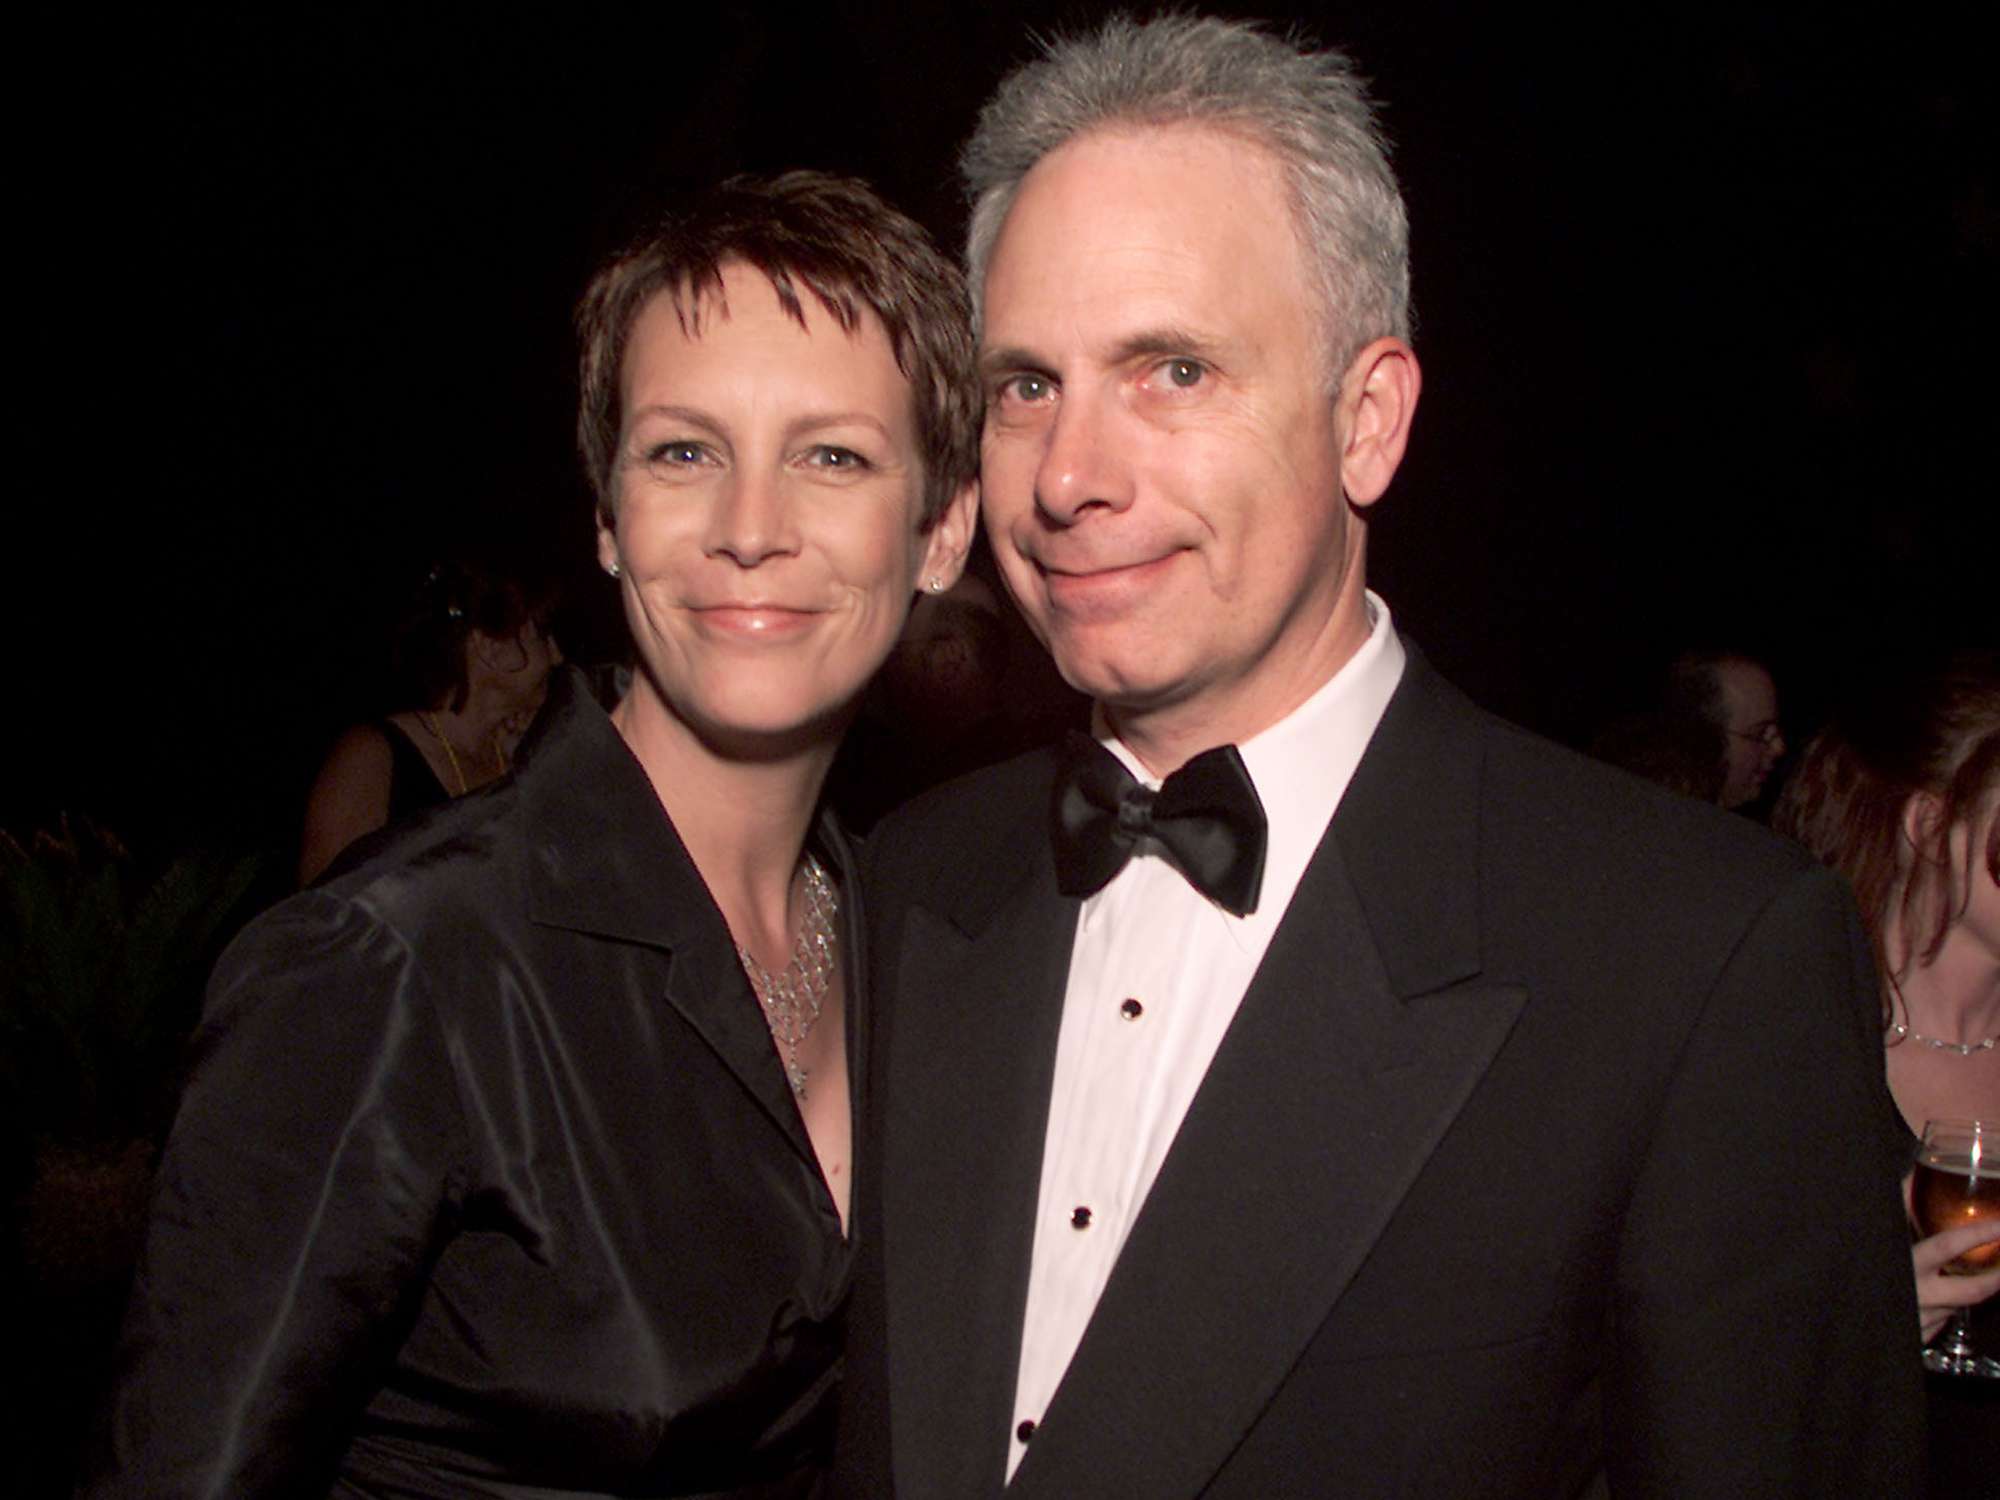 Jamie Lee Curtis and husband Christopher Guest at Comedy Central's post-party after the 15th Annual American Comedy Awards on April 22, 2001.